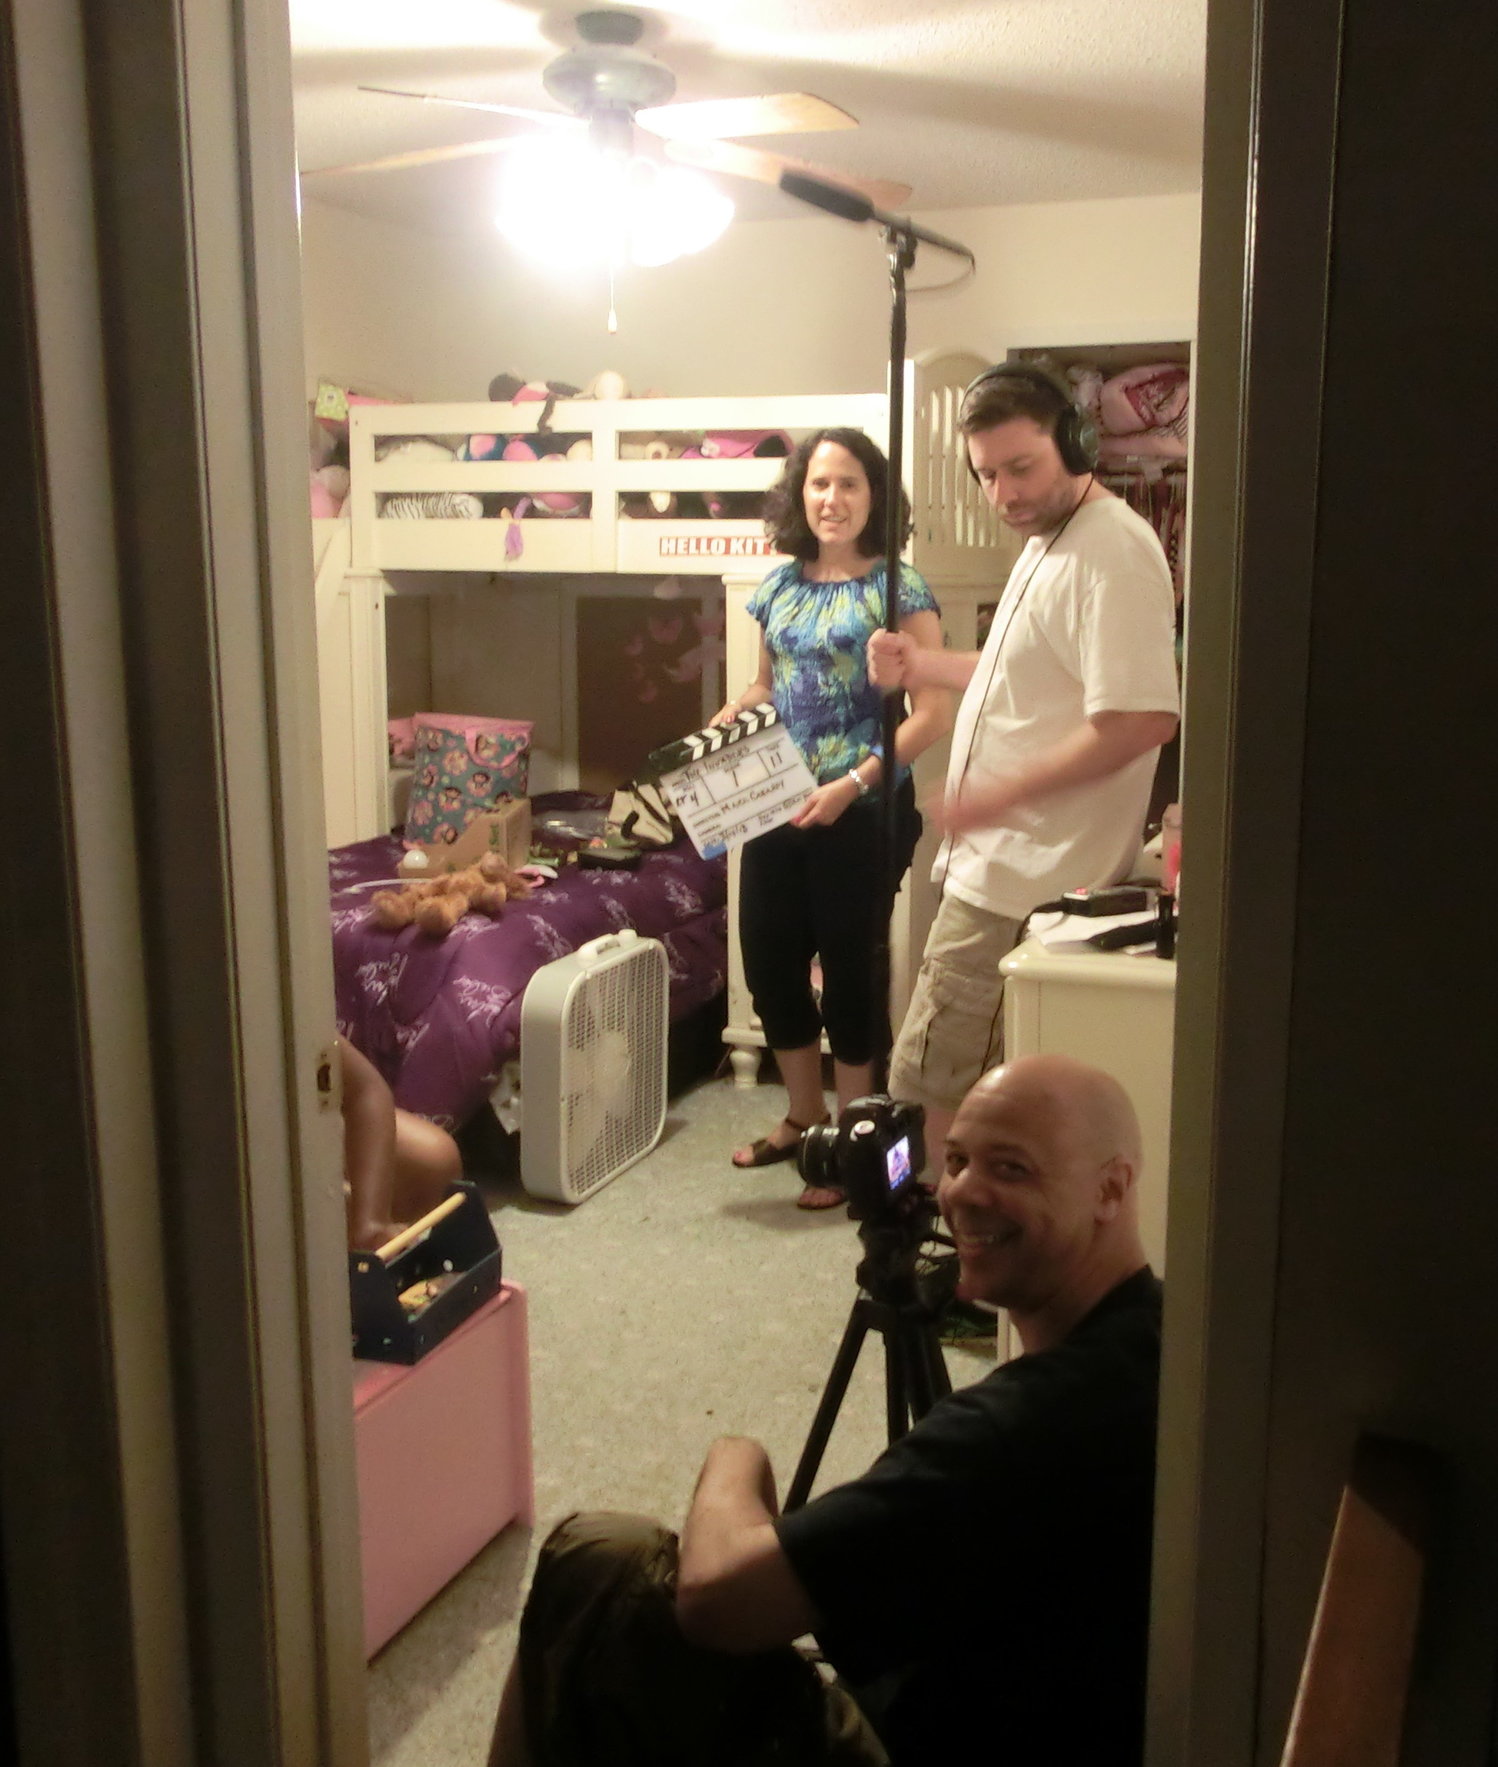 Producing The Invaders: Angie's Logs in Angie's Bedroom Scene with Director Mark Cabaroy